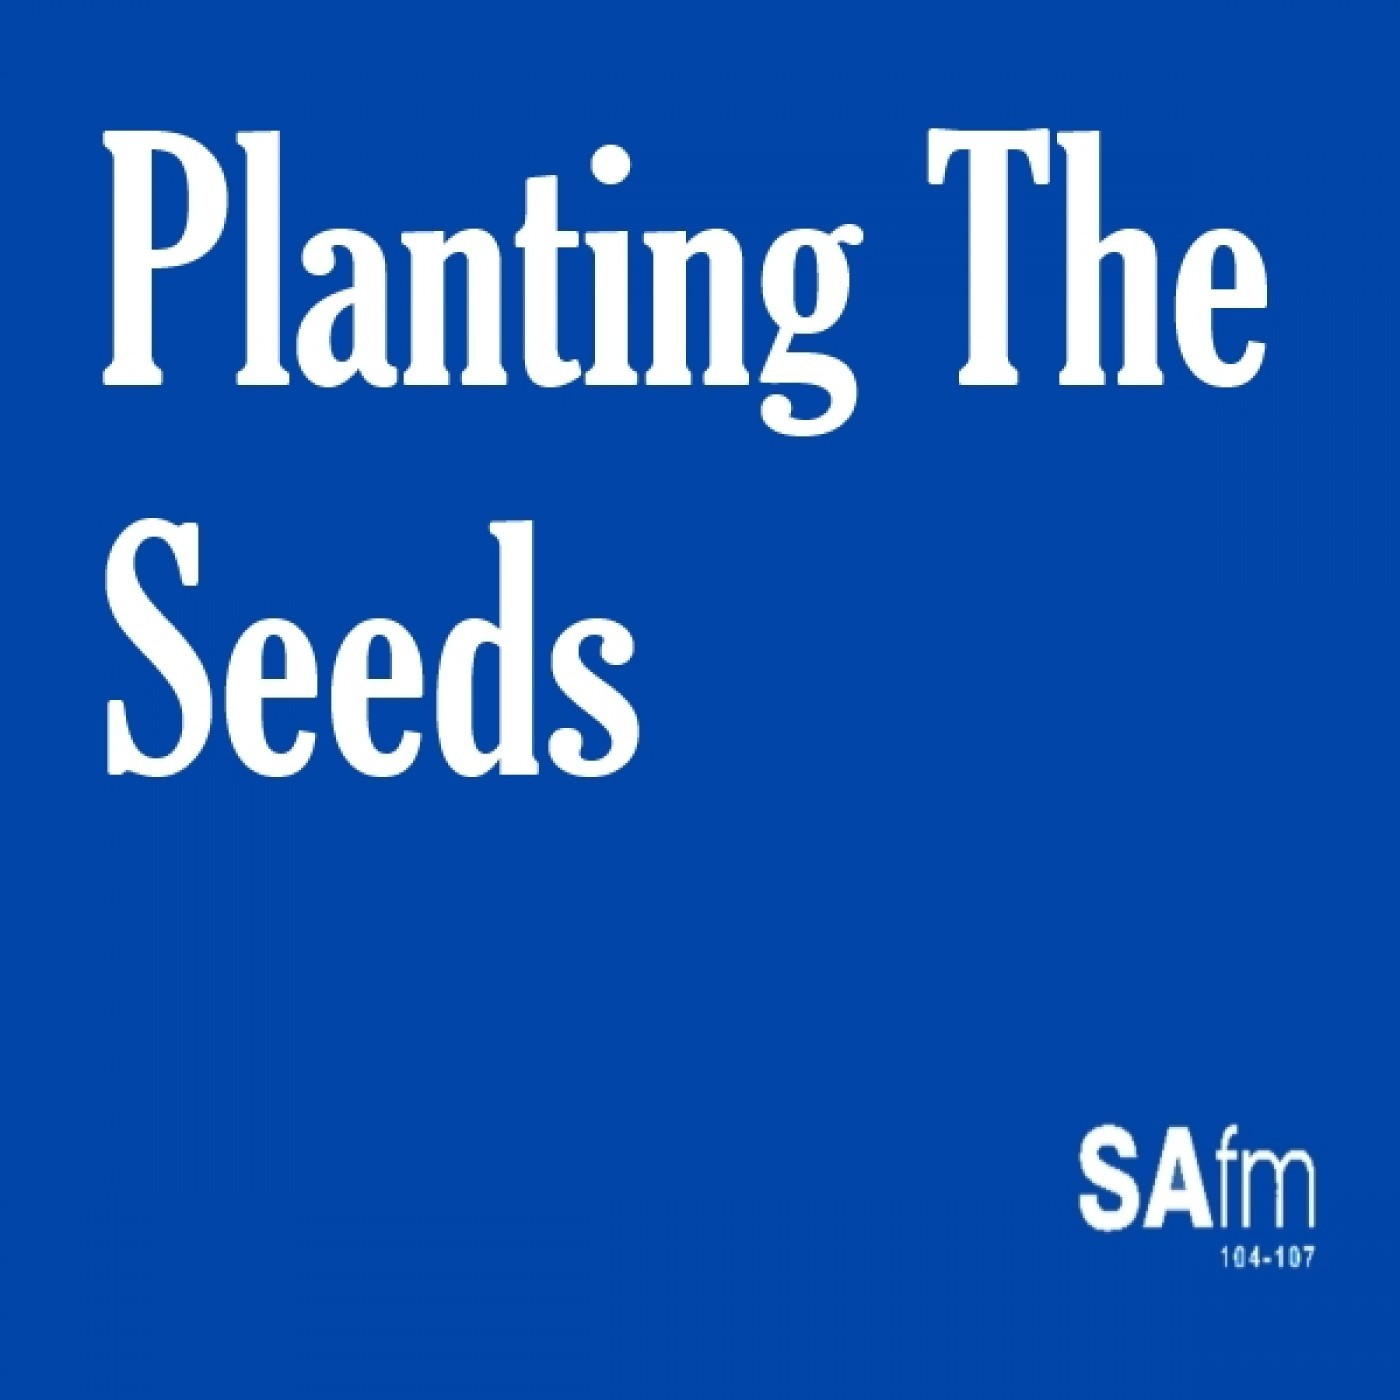 29-03-2019 PLANTING THE SEEDS